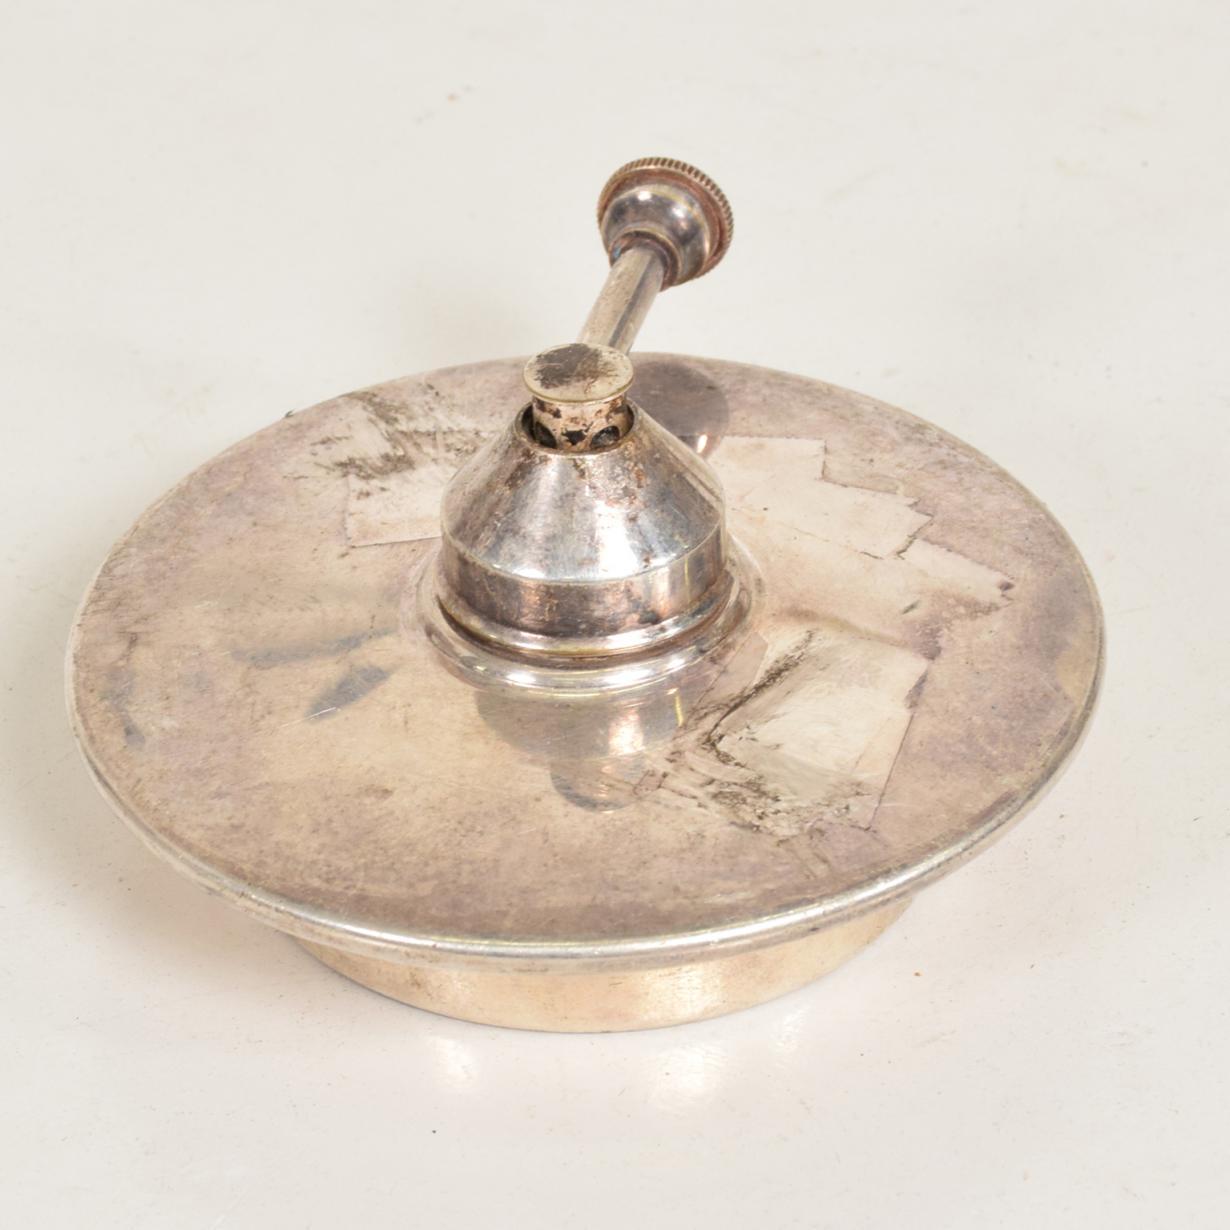 For your consideration, a modern silver plated chafing dish burner.

No information on the maker. 

Dimensions: 4 3/4